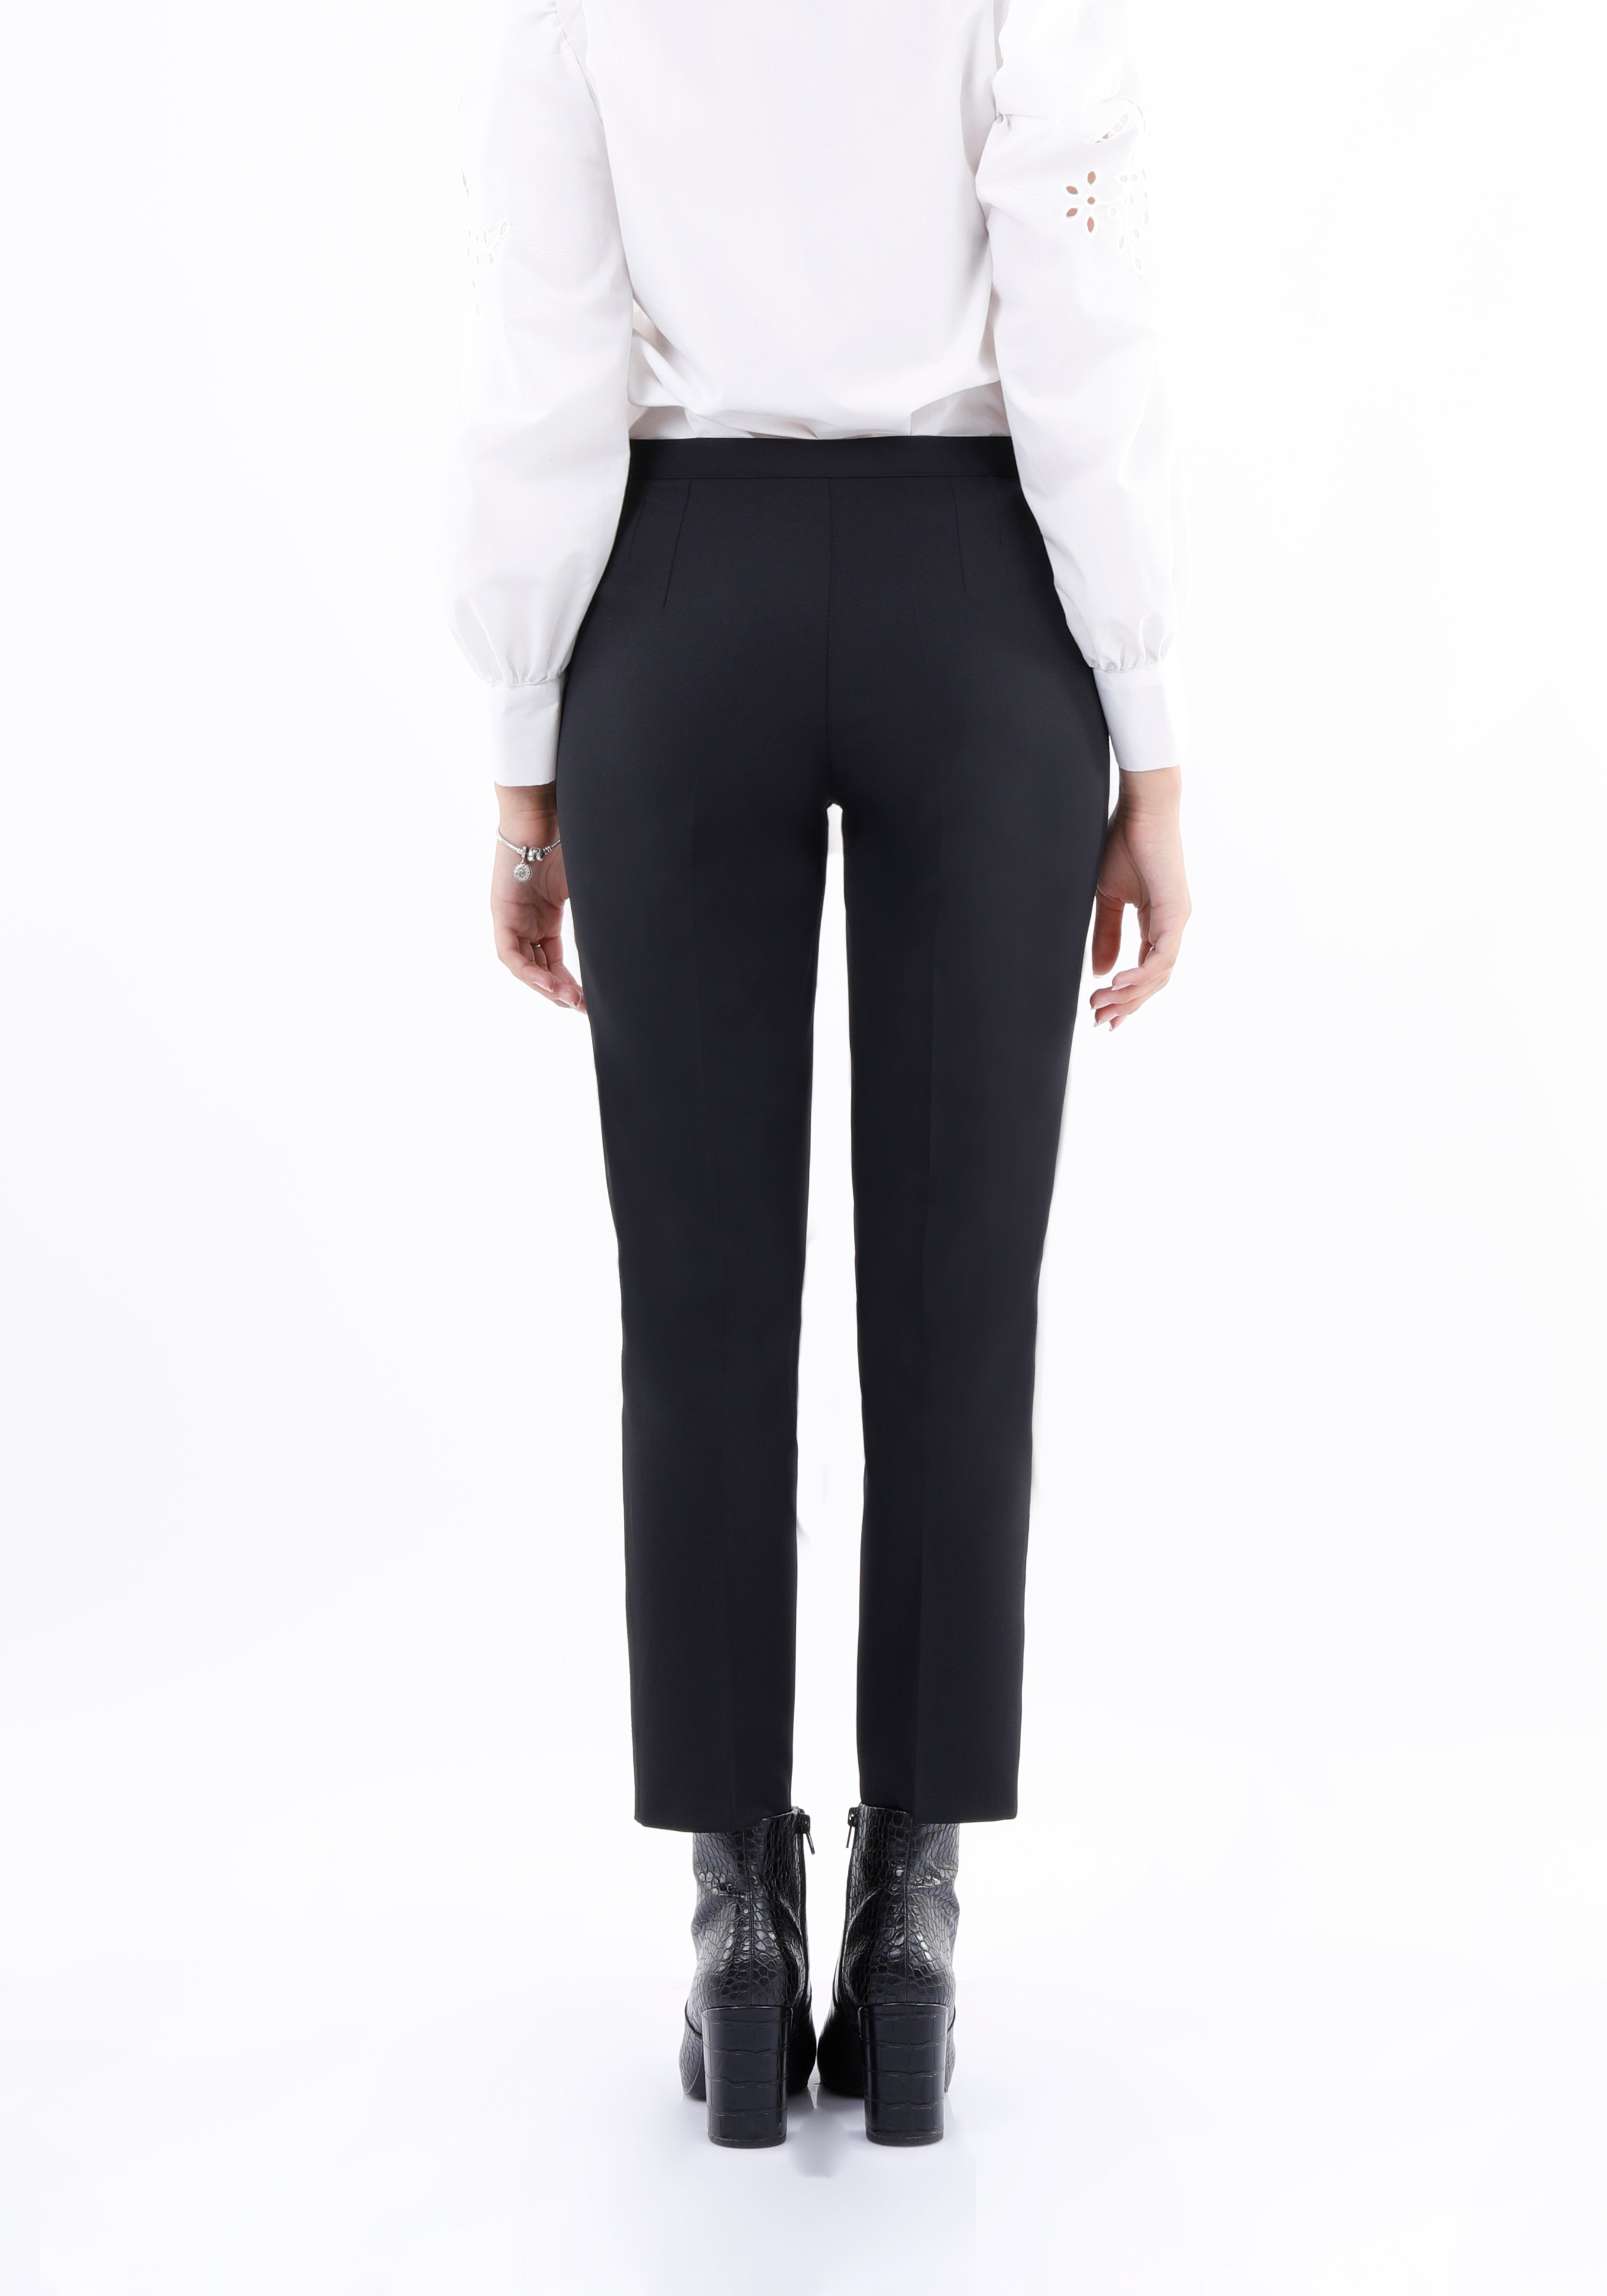 Copy of Navy Ankle-Length Slim-Fit / Skinny Pants for Women G-Line